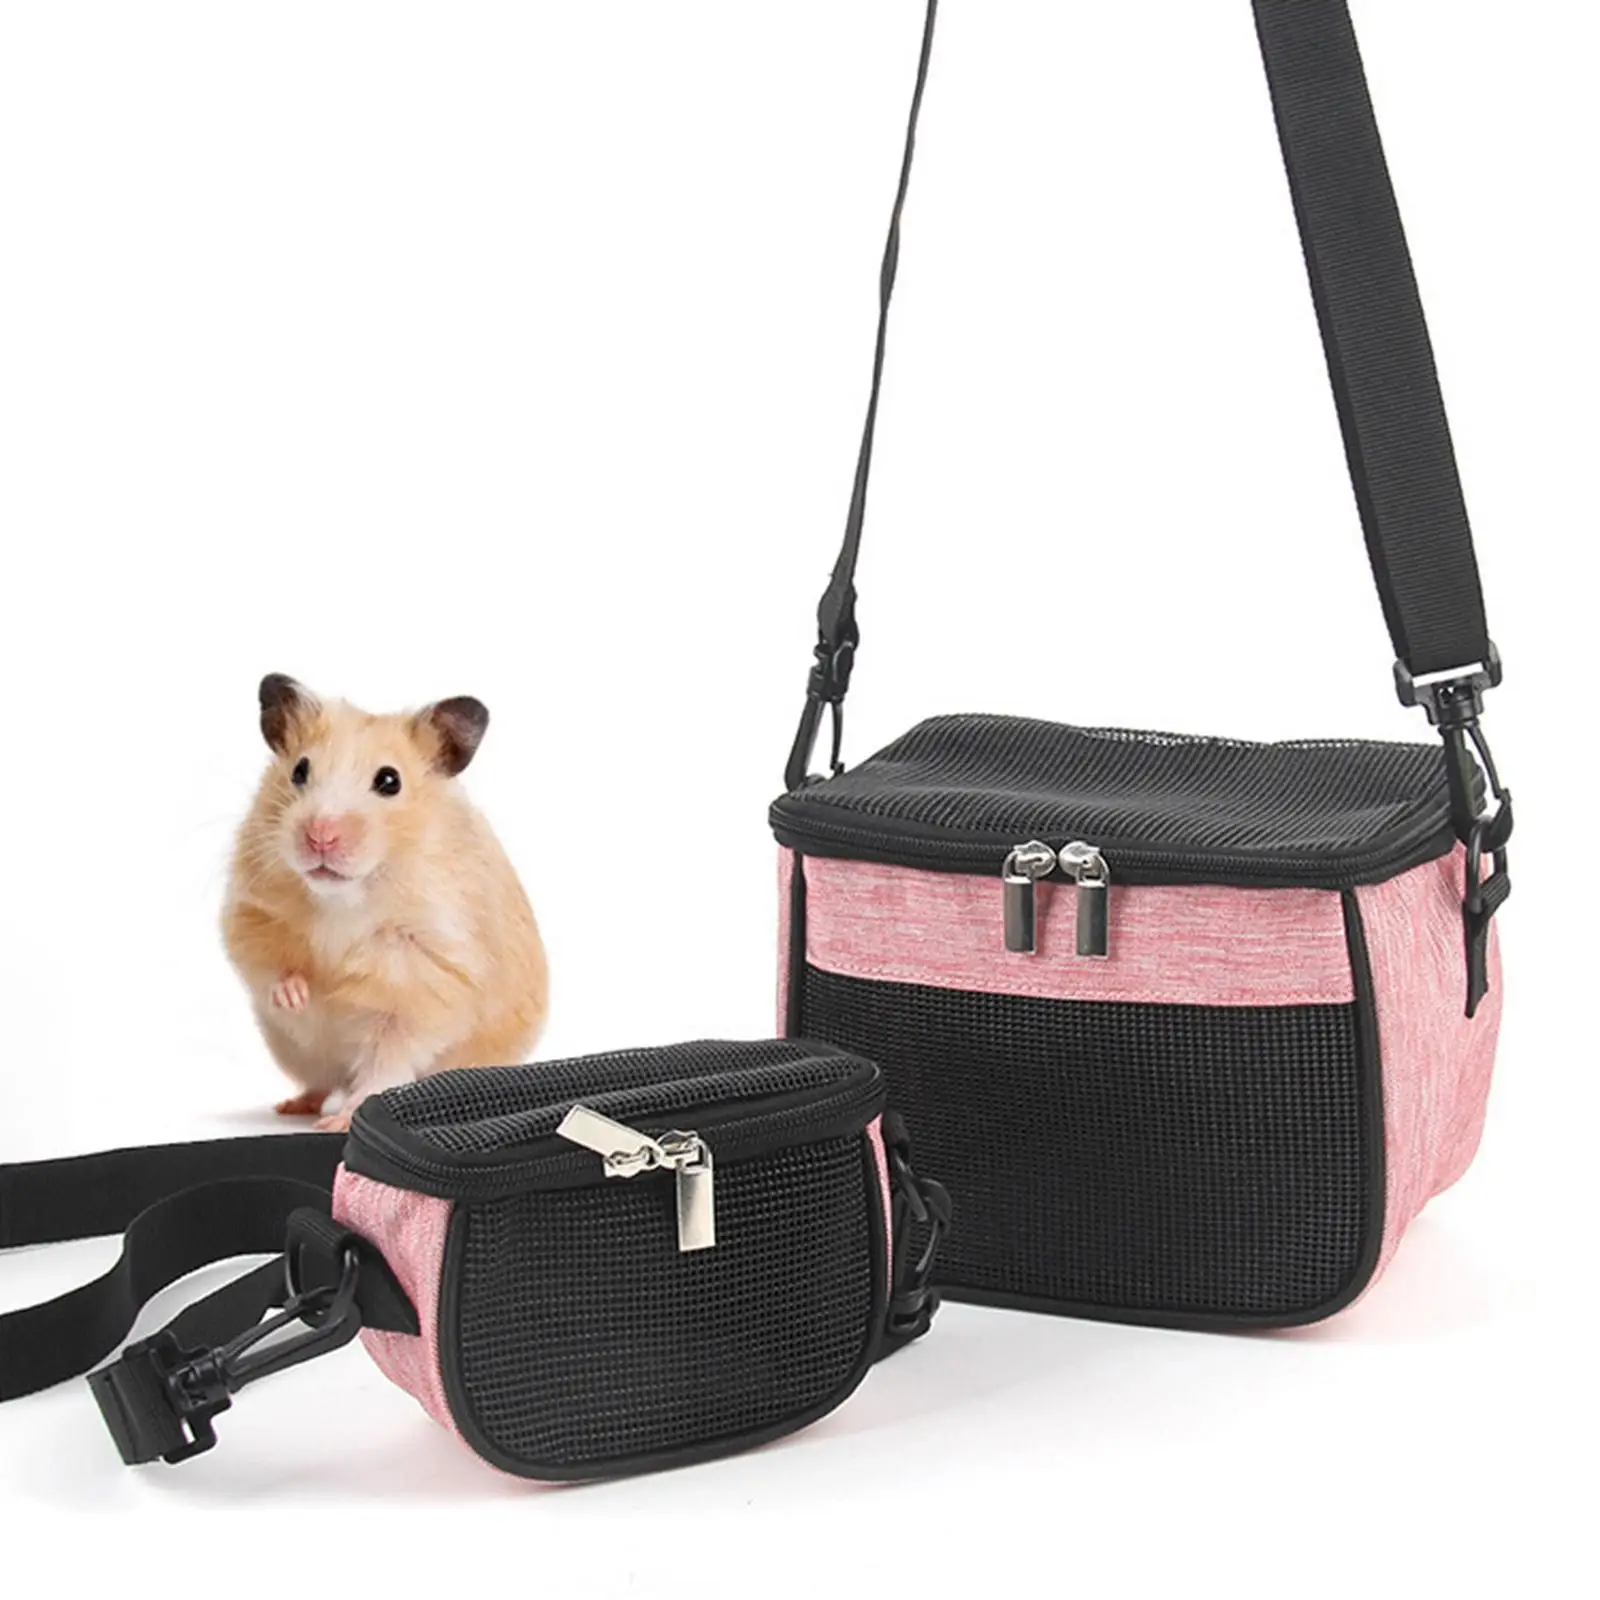 Hamster Carrier Guinea Pig Travel Transport Bags Small Dog Pets Outdoor Tote